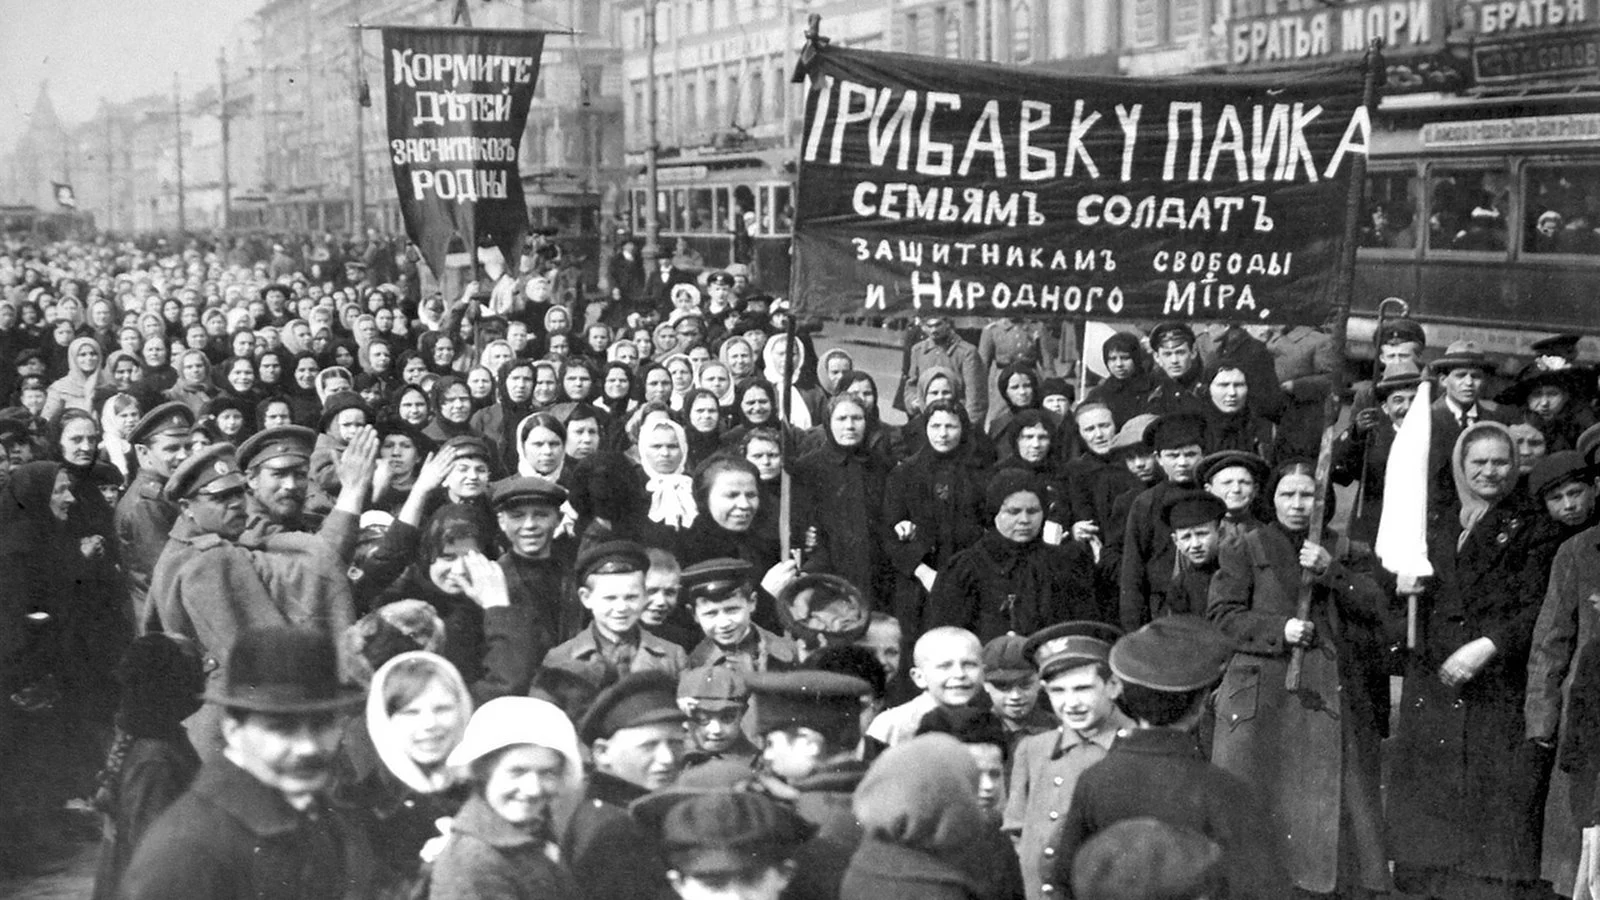 <p>The Russian Revolution occurred in the Soviet Union as an act of addressing the political issues in the state.</p><ol><li><p>The internal factors of the government not supporting industrialization led to external factors as they had lost wars due to a lack of a strong military. This led to creation of a nation under communism and the state shifting to power under the Bolsheviks</p></li></ol>